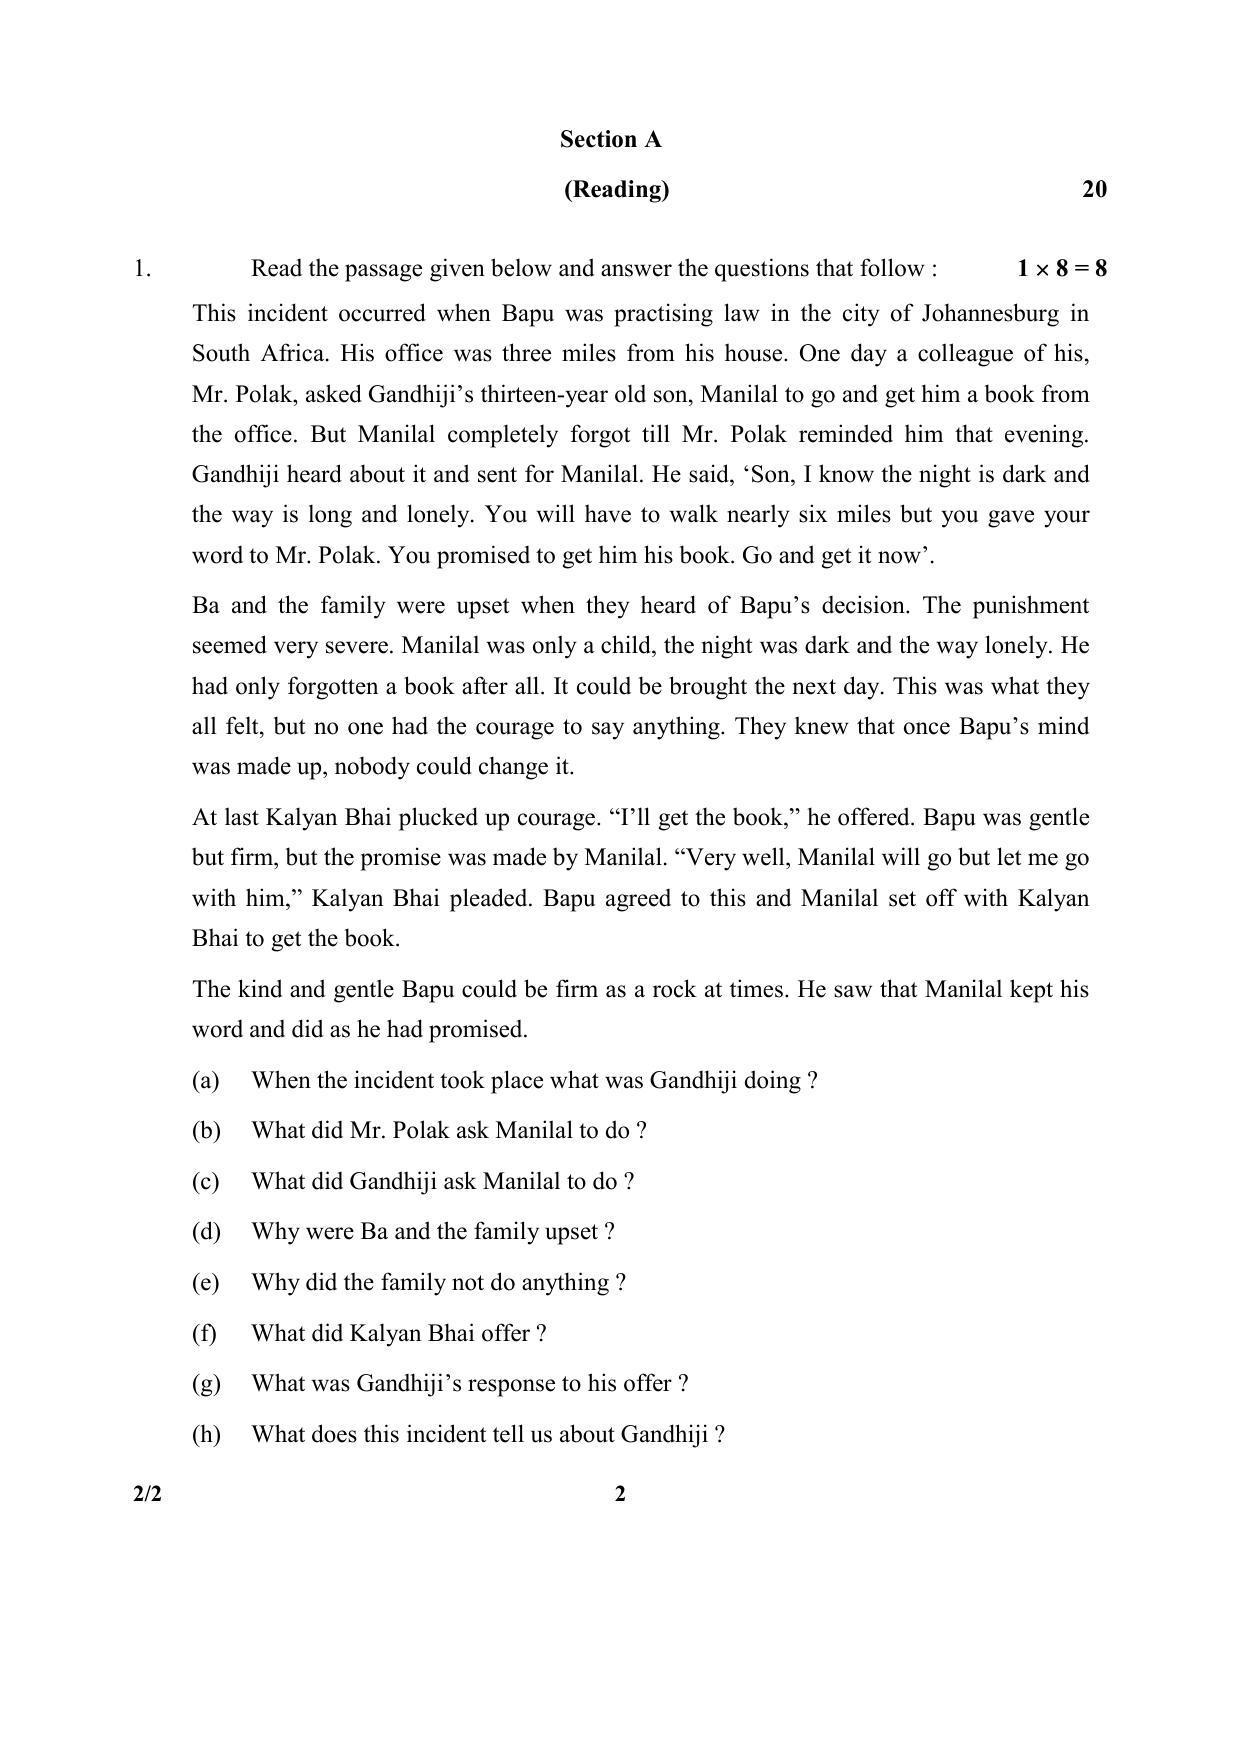 CBSE Class 10 2-2 English (Language And Literature) 2017-comptt Question Paper - Page 2